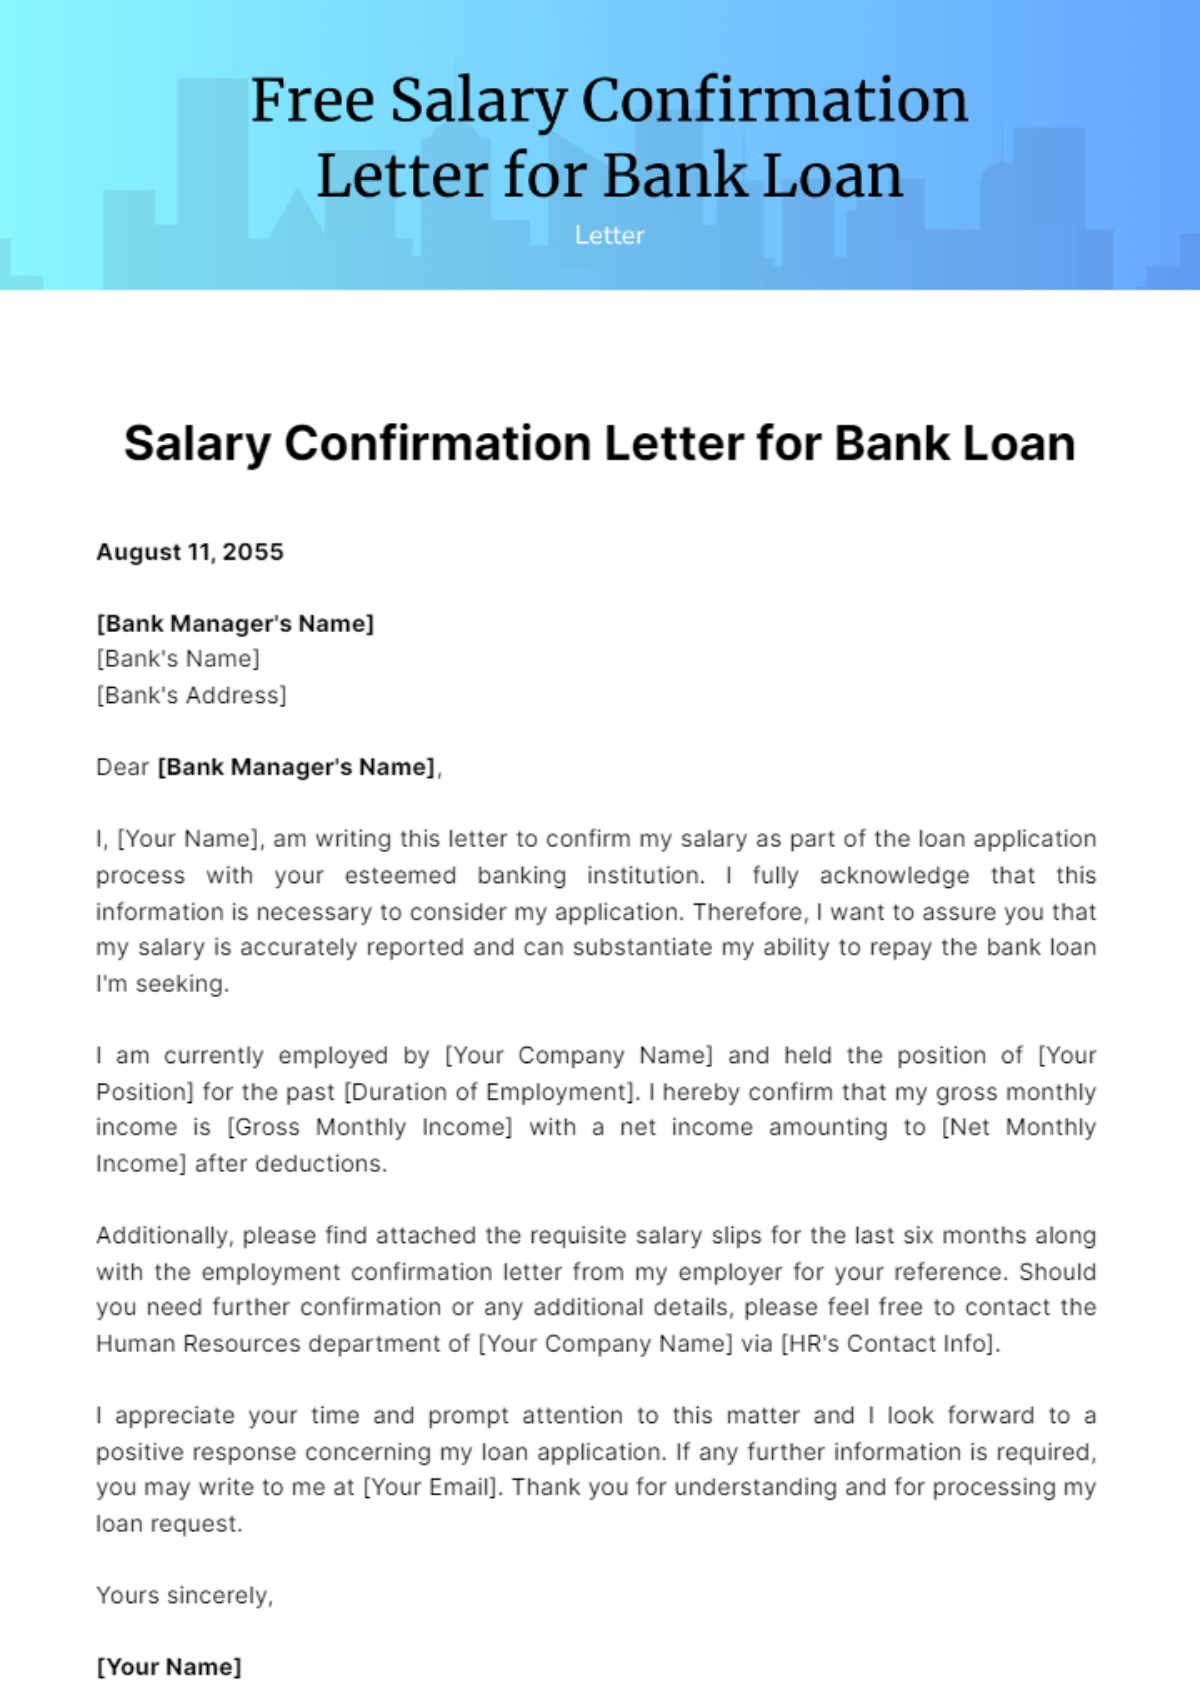 Free Salary Confirmation Letter for Bank Loan Template